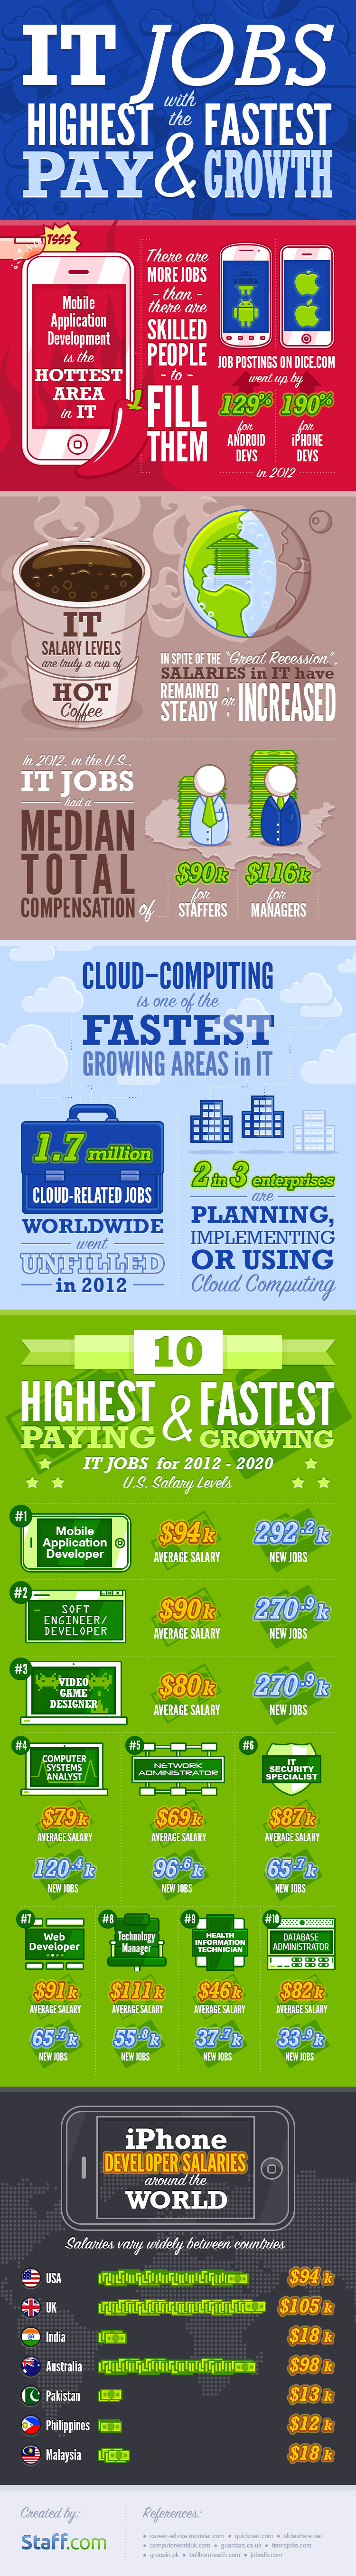 IT Jobs With the Highest Pay and Fastest Growth